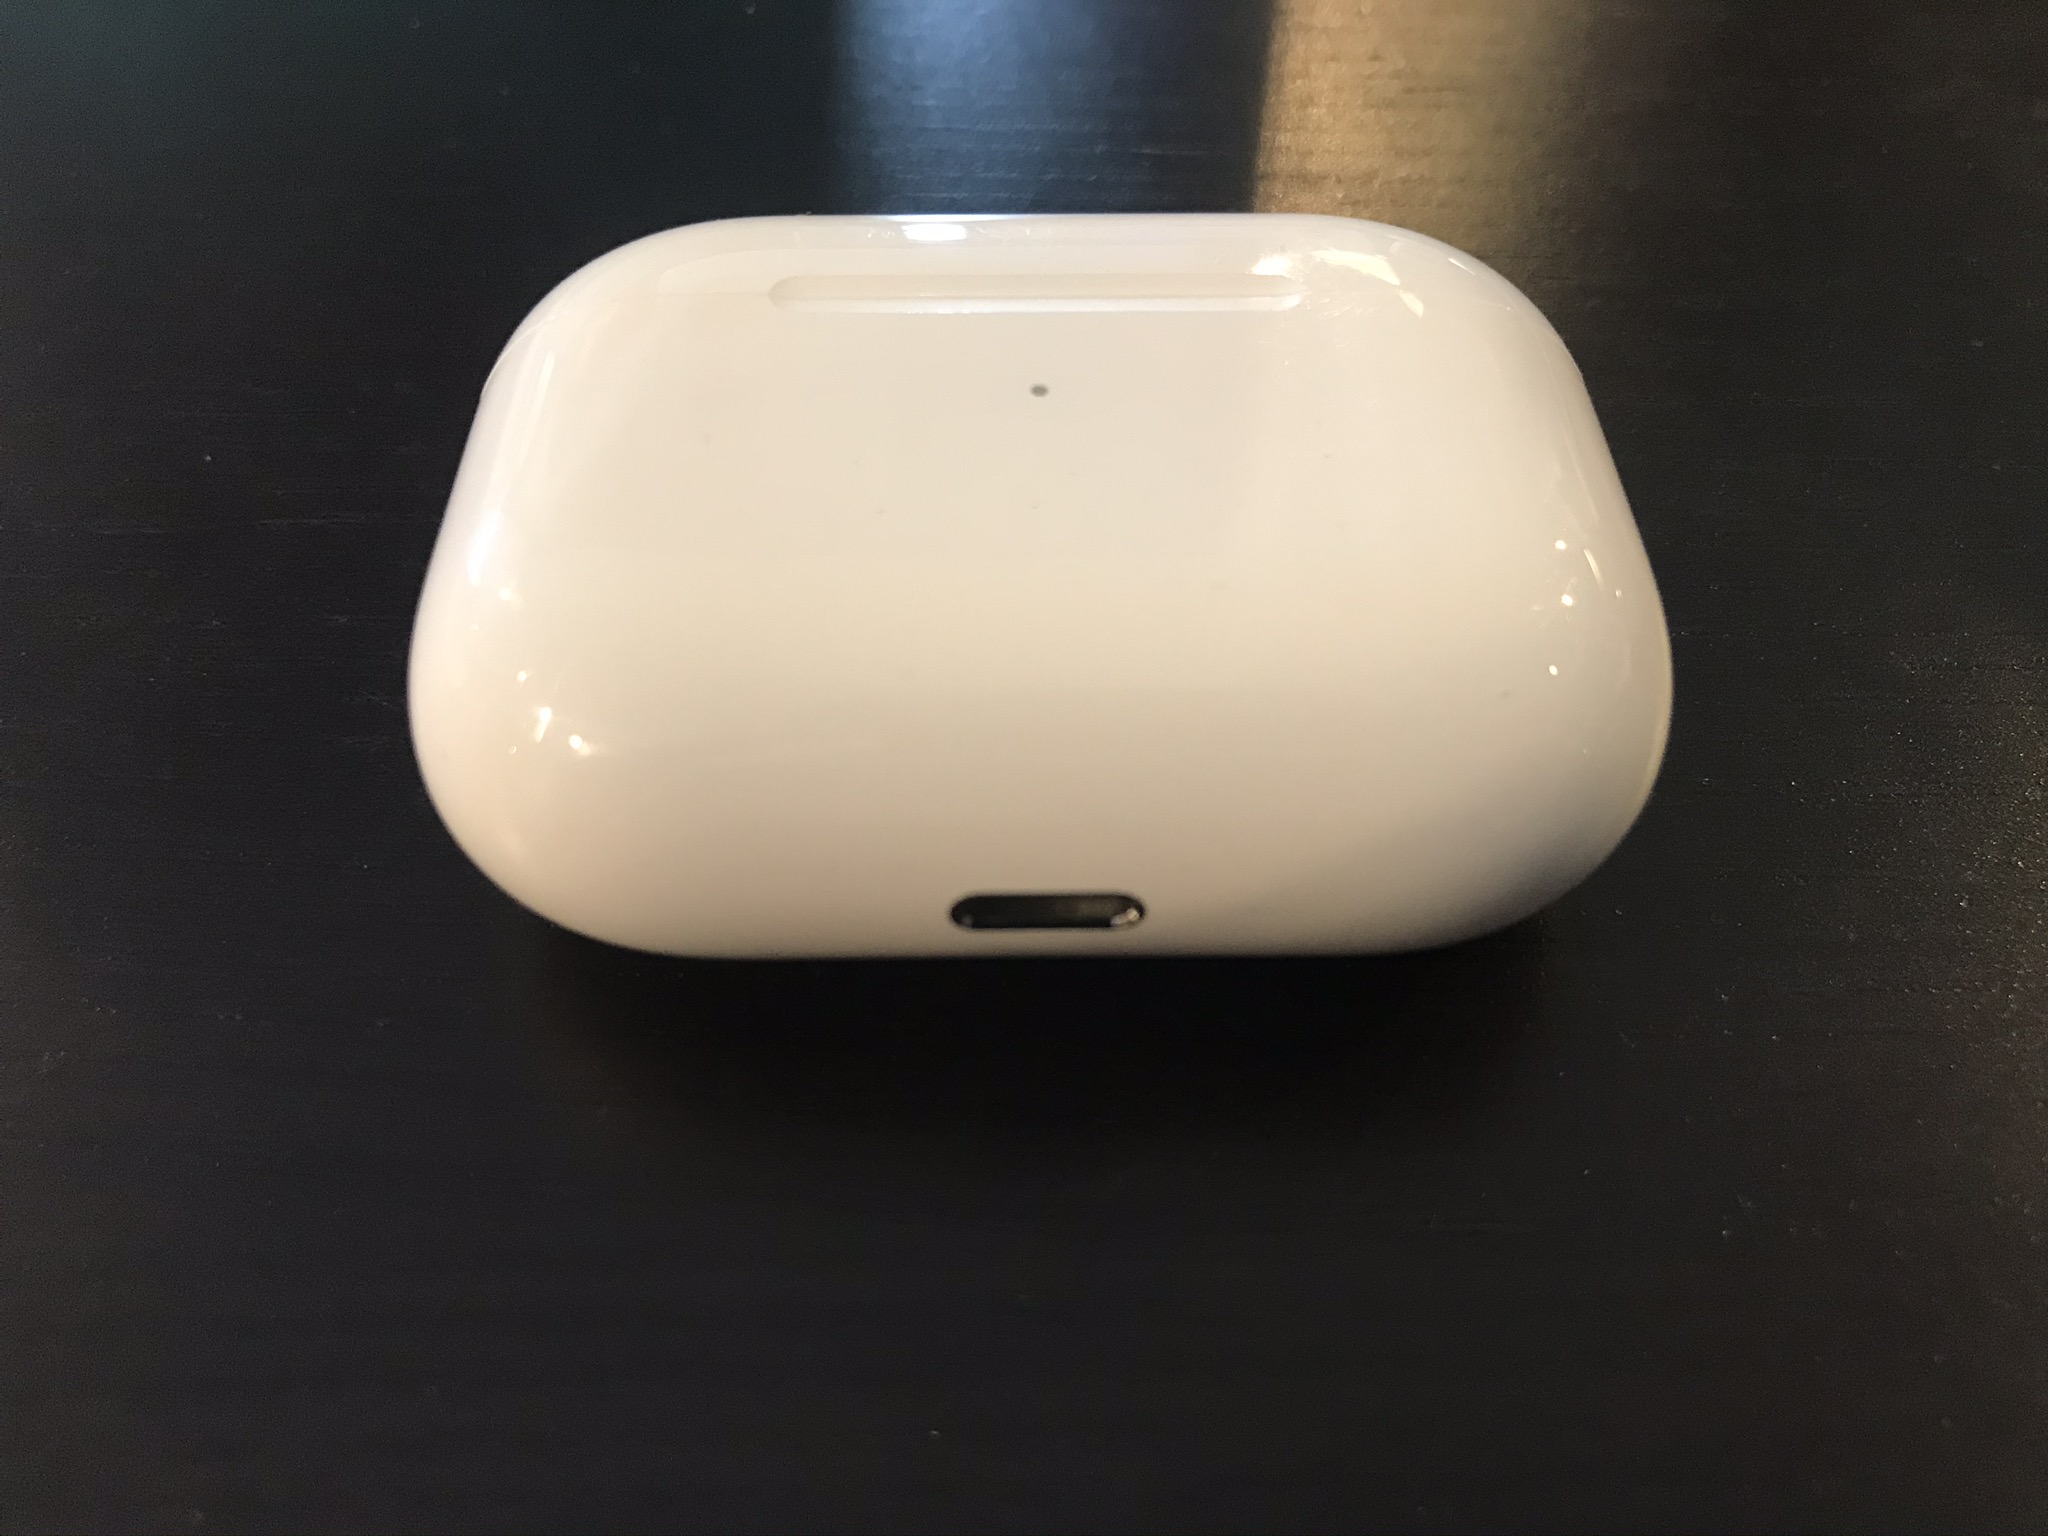 AirPods Proで体験する静寂の世界